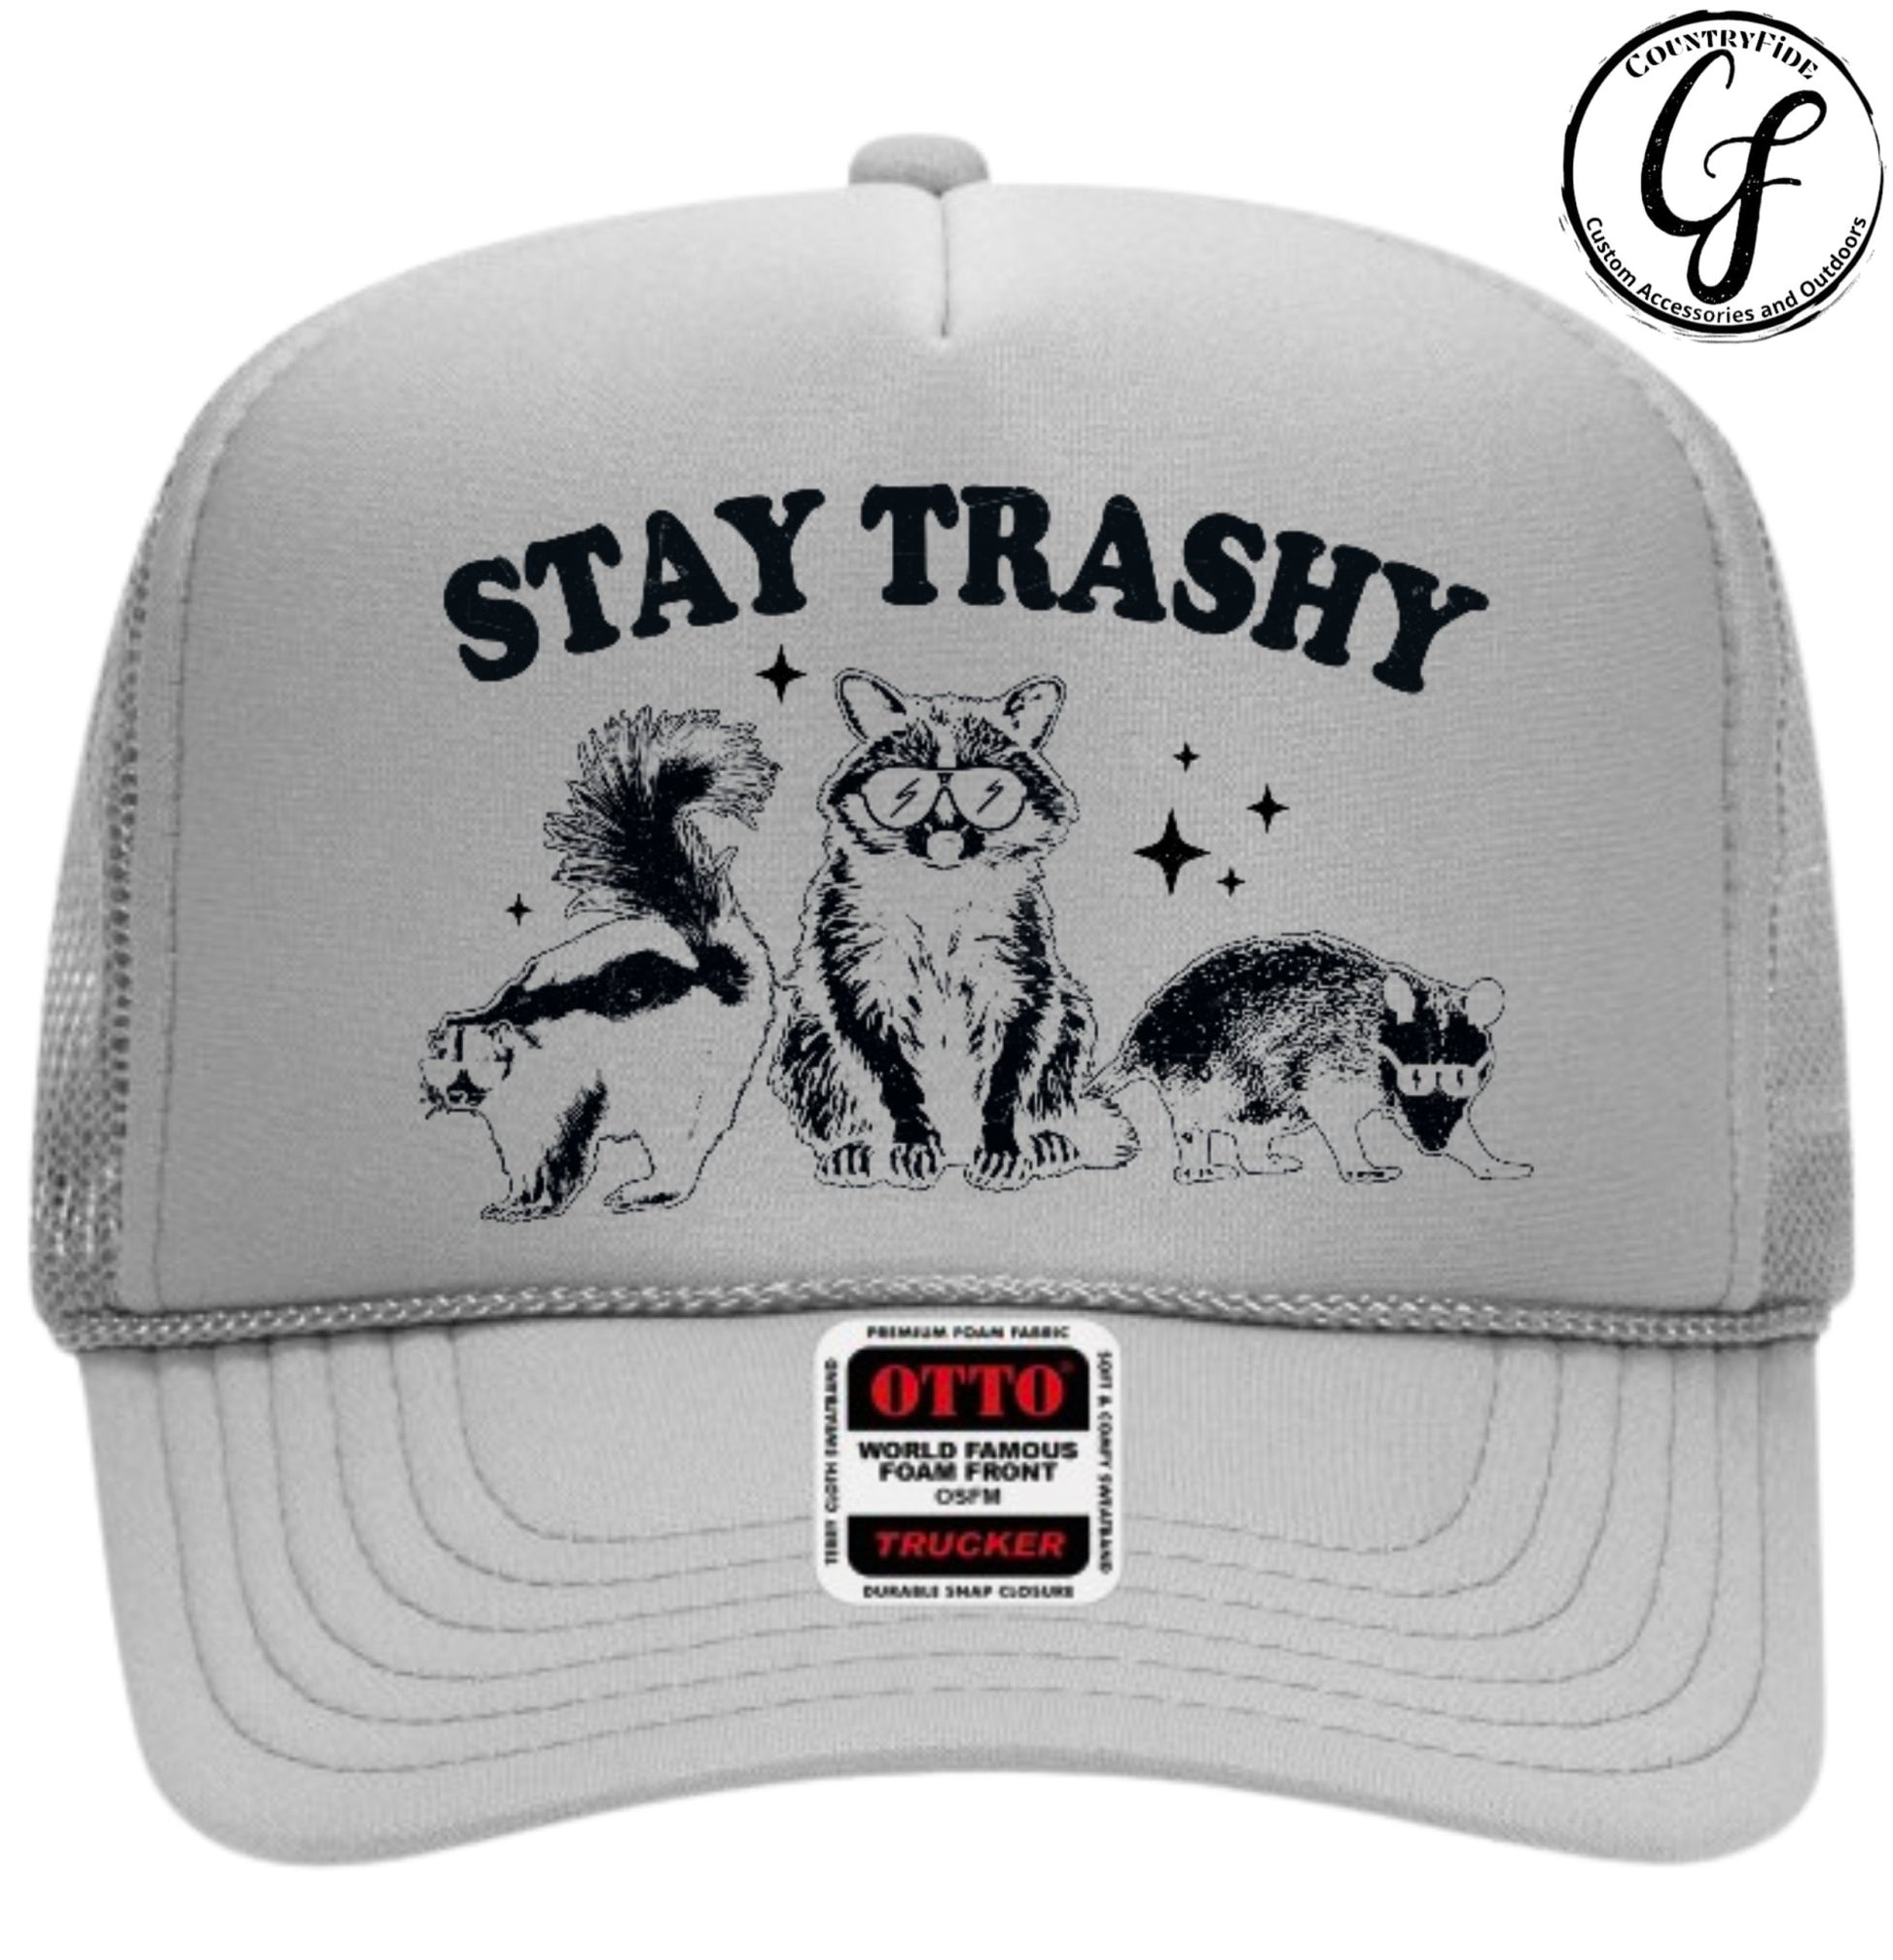 STAY TRASHY - CountryFide Custom Accessories and Outdoors